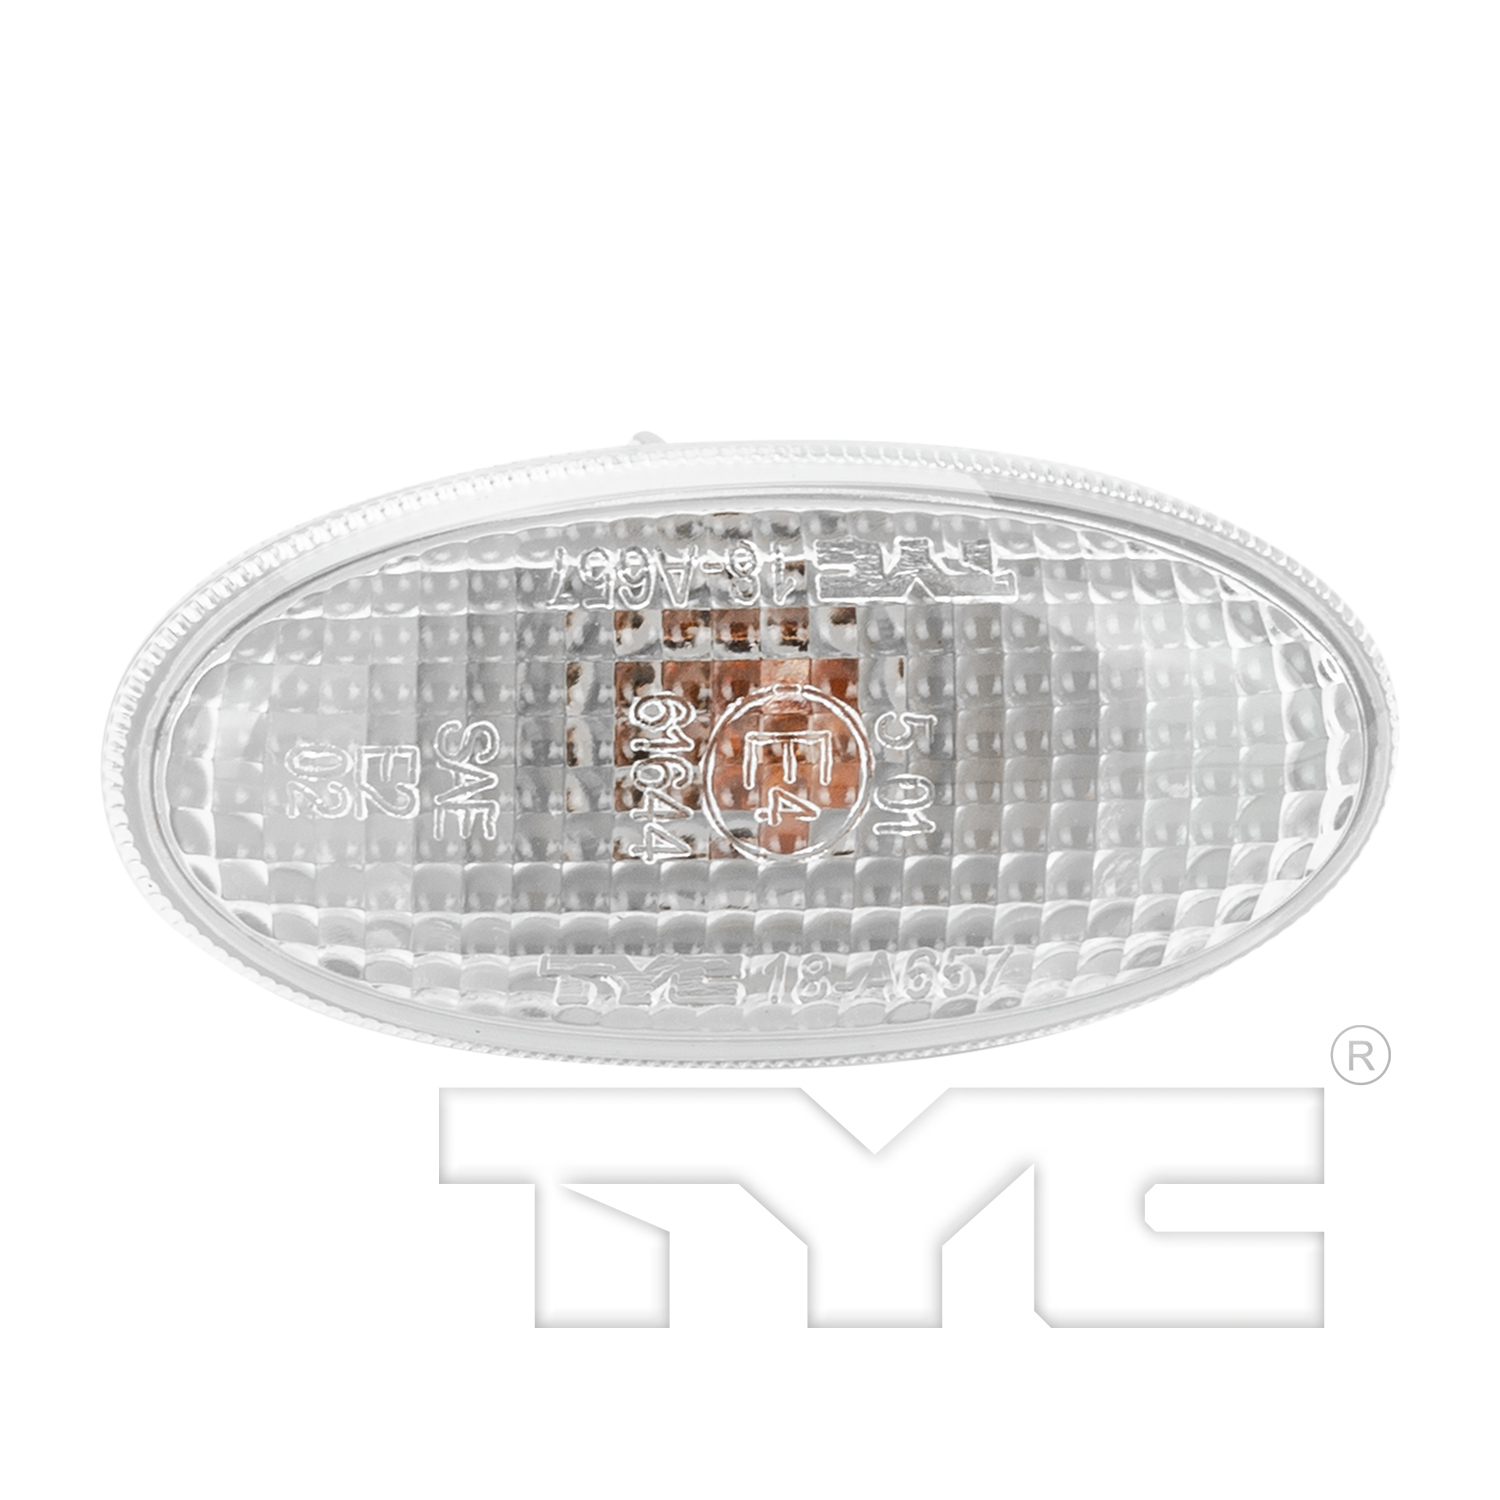 Aftermarket LAMPS for MAZDA - MPV, MPV,00-06,LT Side repeater lamp